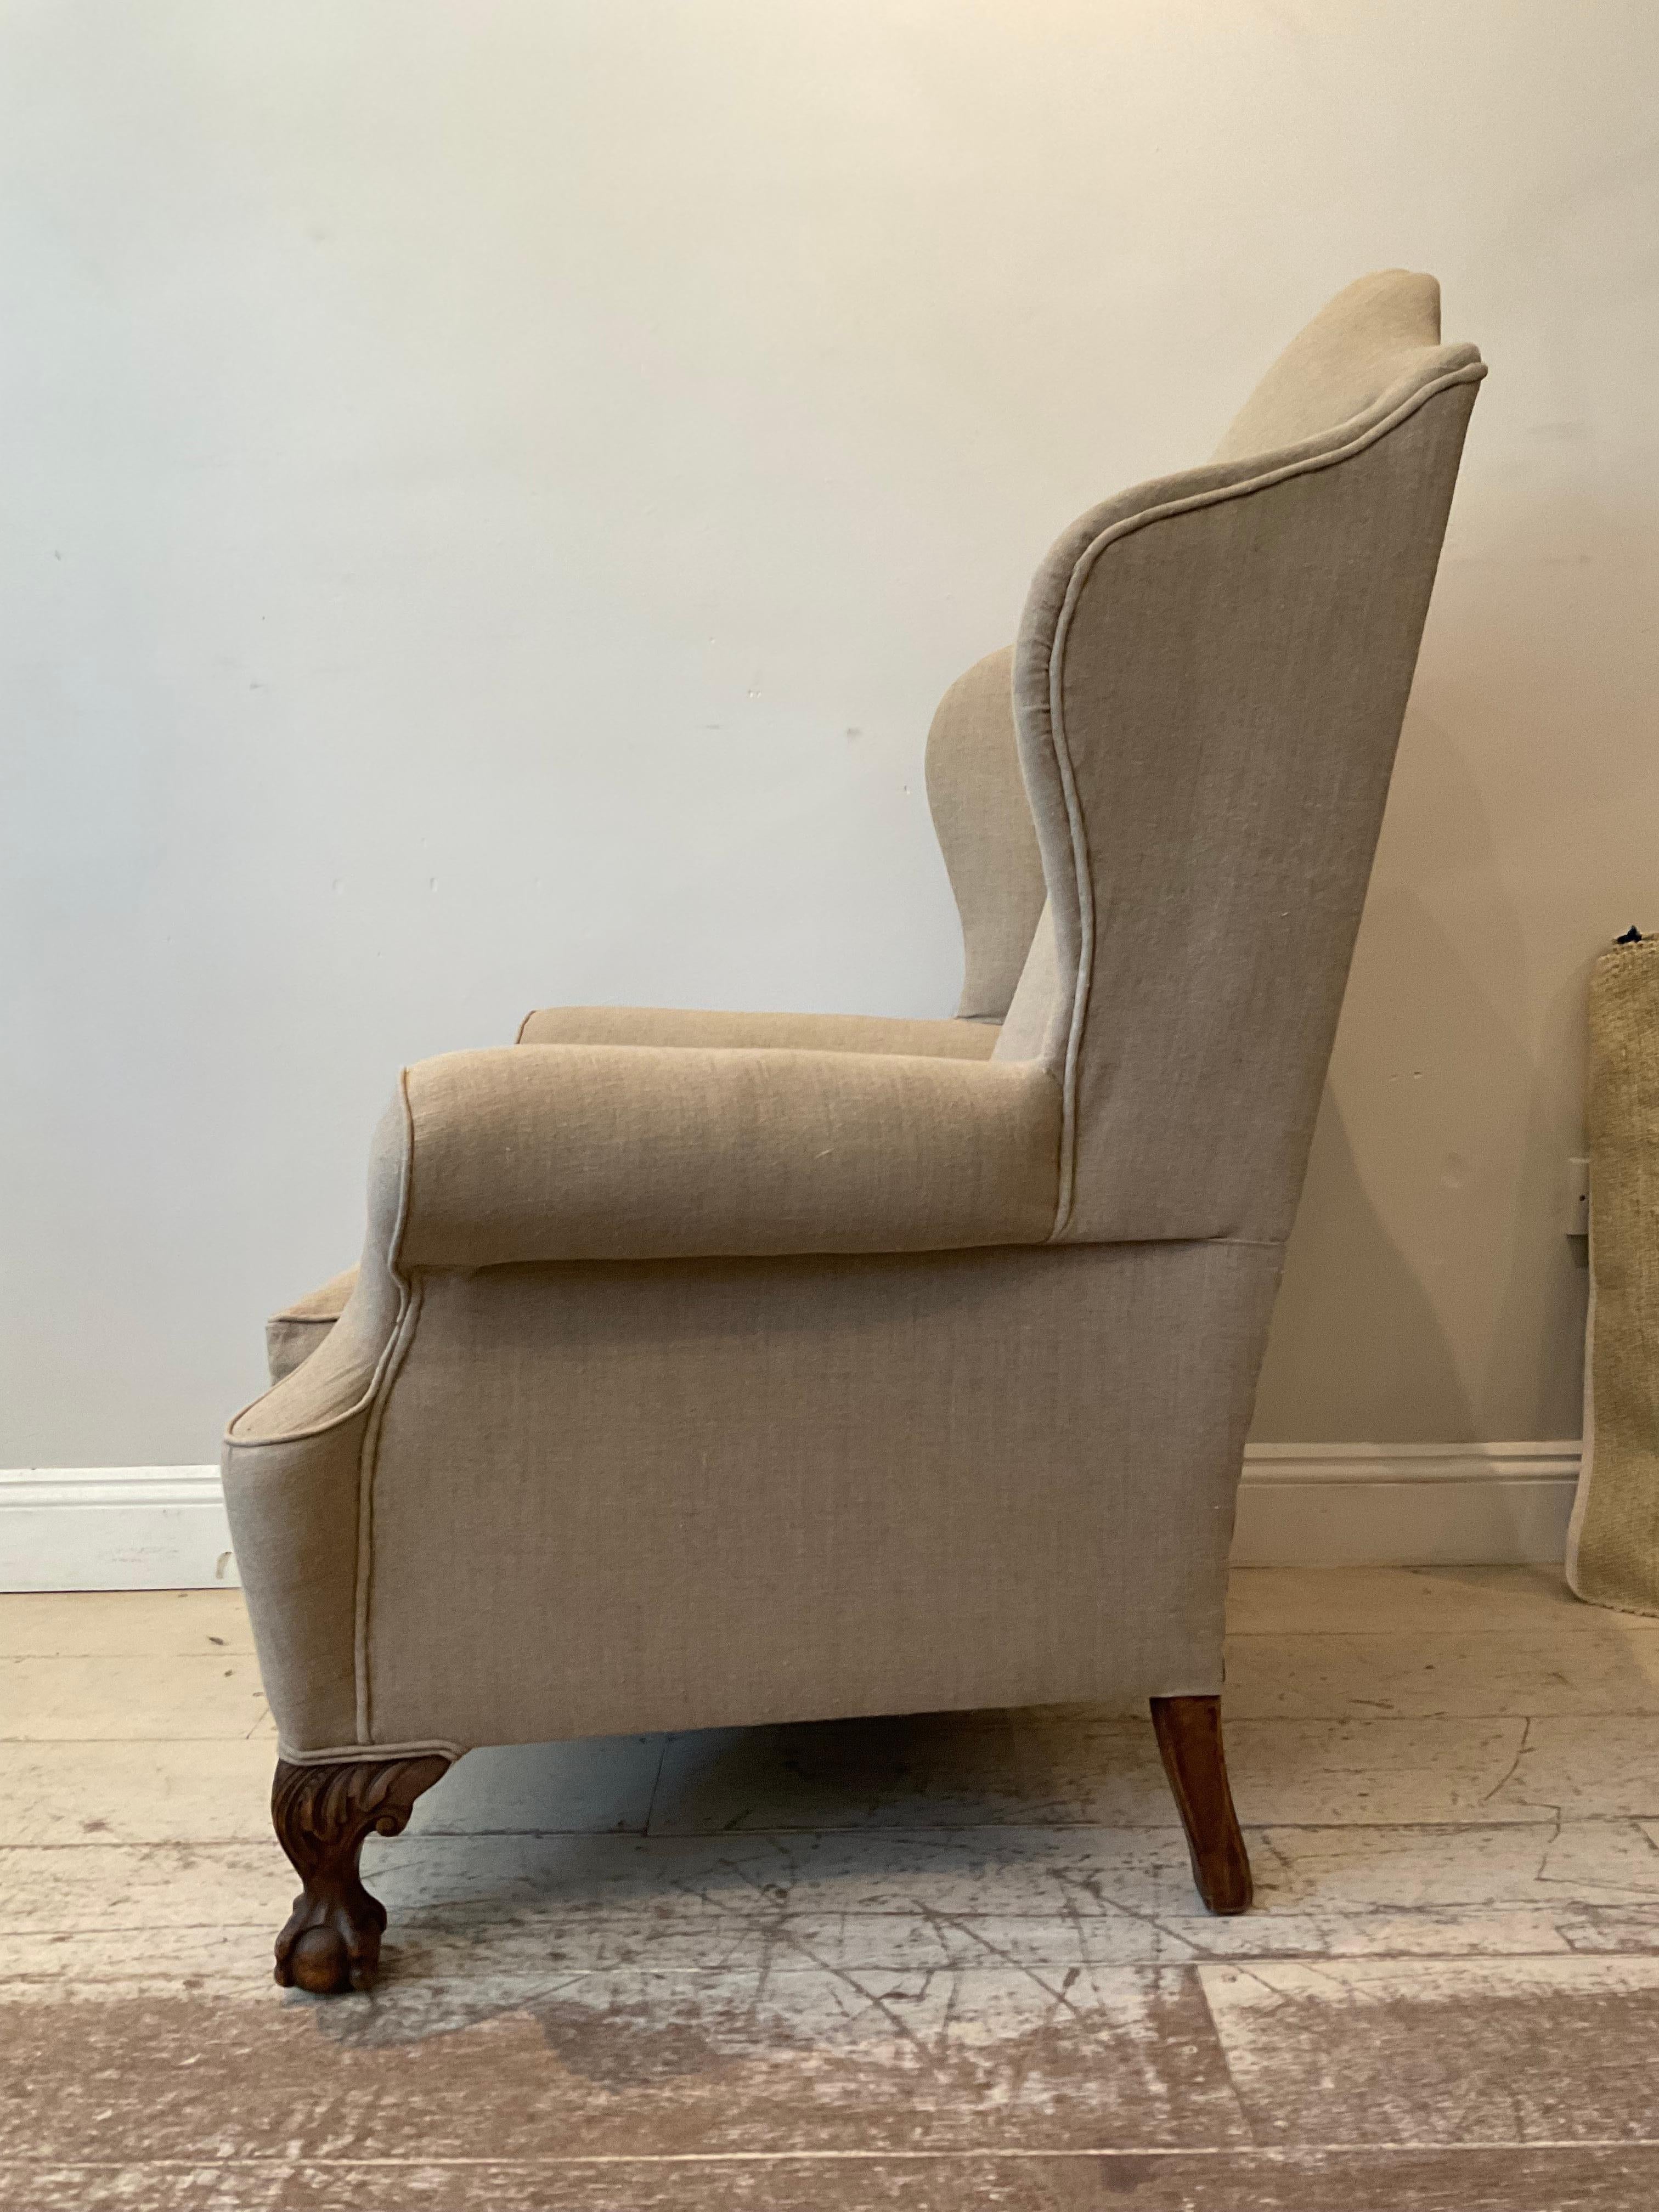 20th Century Pair of Large 1920s English Wing Back Chairs Upholstered in Neutral Linen